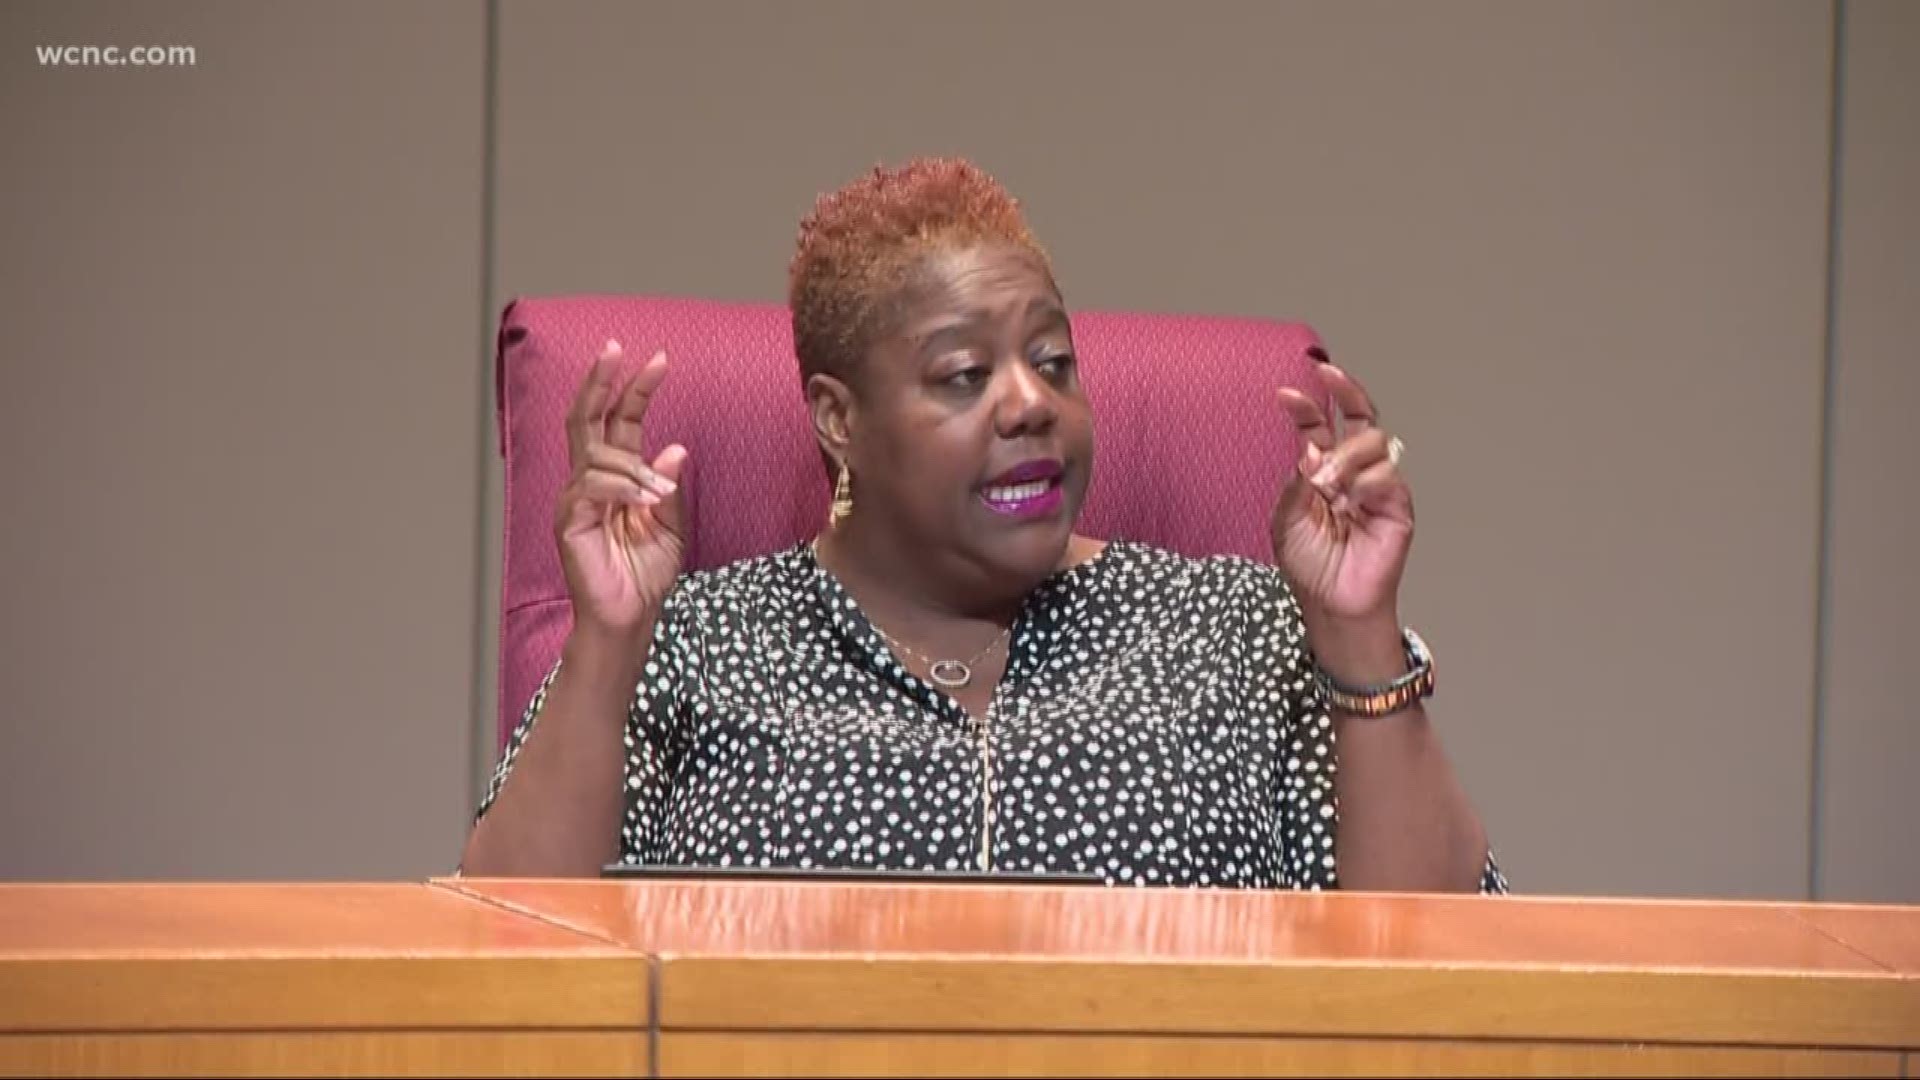 Charlotte council woman Lawana Mayfield continued her Twitter tirade over the weekend.